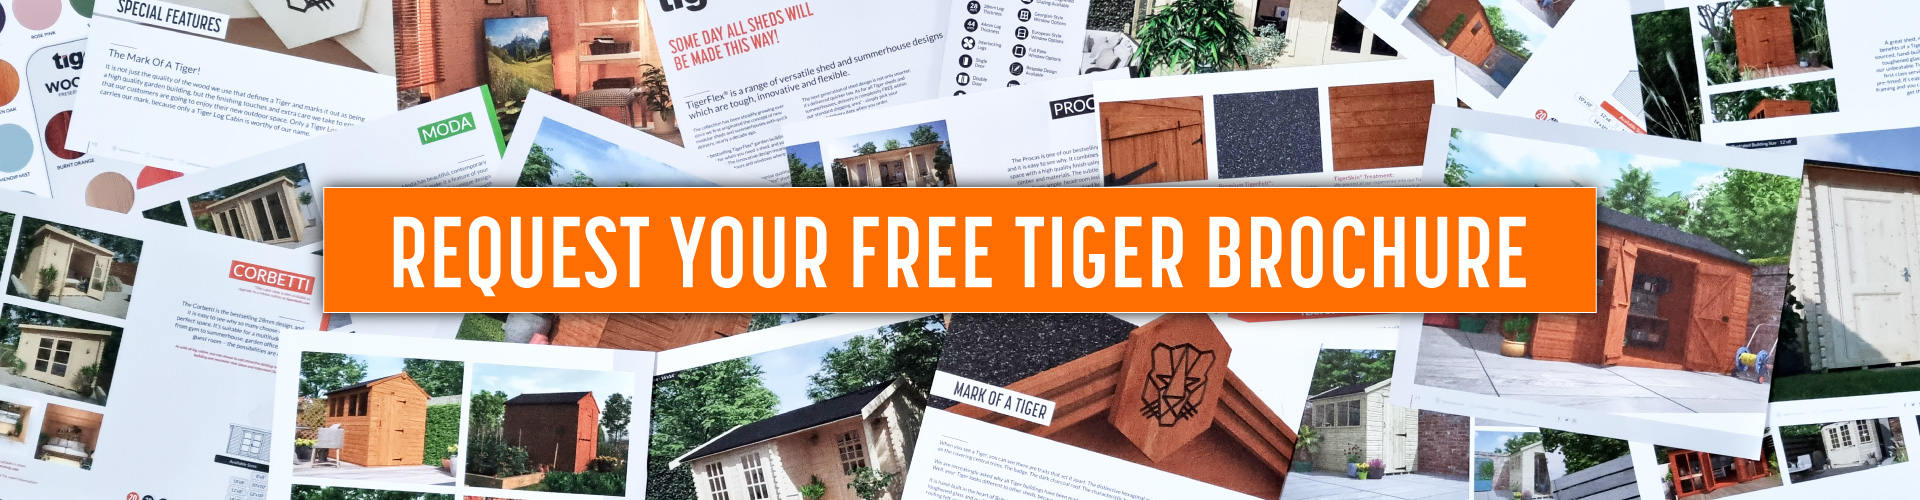 Request Your Free Tiger Sheds Brochure